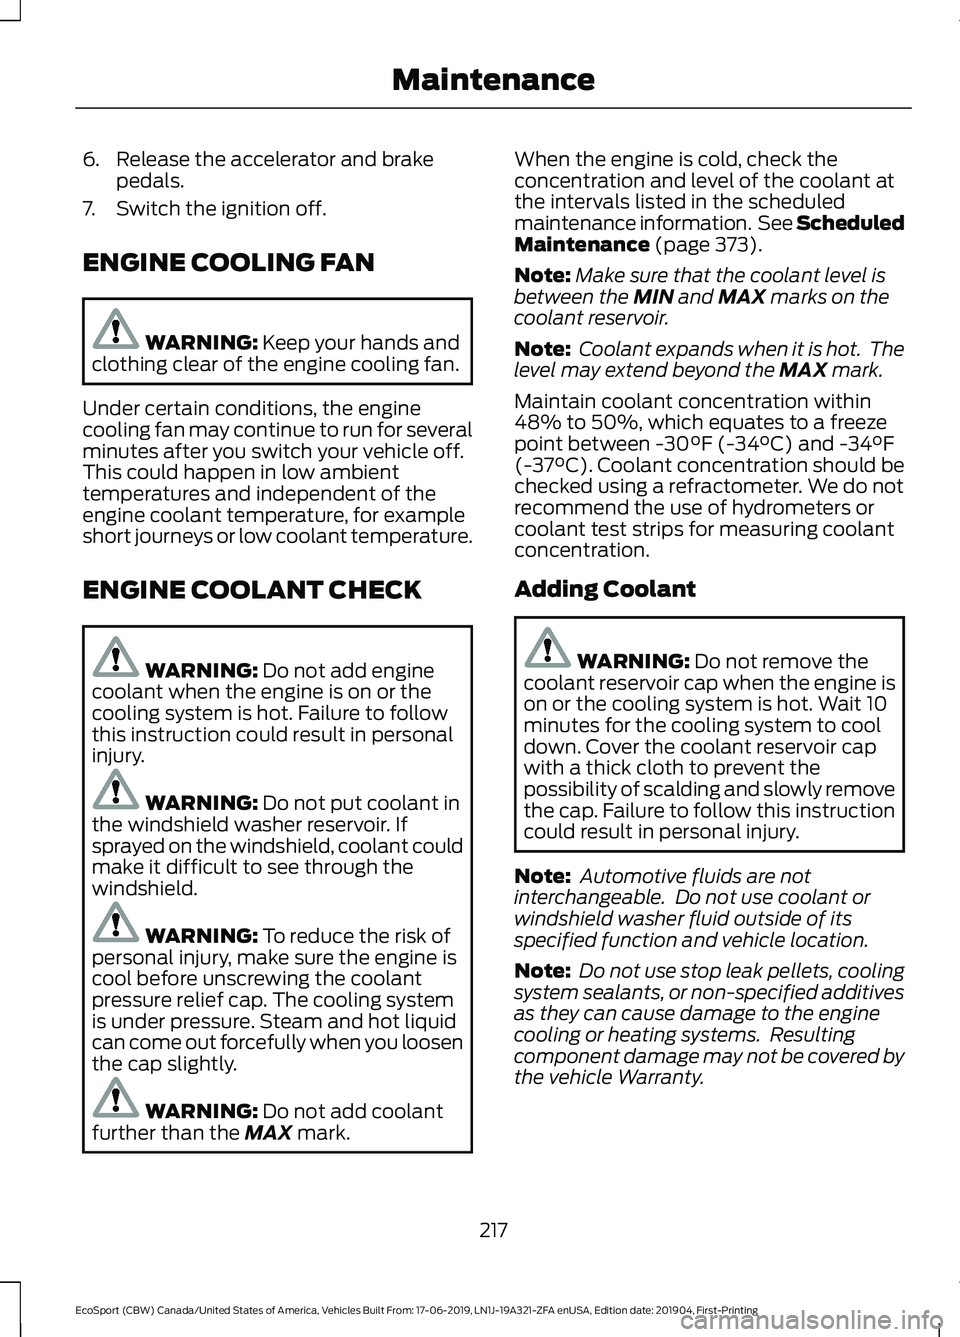 FORD ECOSPORT 2020  Owners Manual 6.Release the accelerator and brakepedals.
7.Switch the ignition off.
ENGINE COOLING FAN
WARNING: Keep your hands andclothing clear of the engine cooling fan.
Under certain conditions, the enginecooli